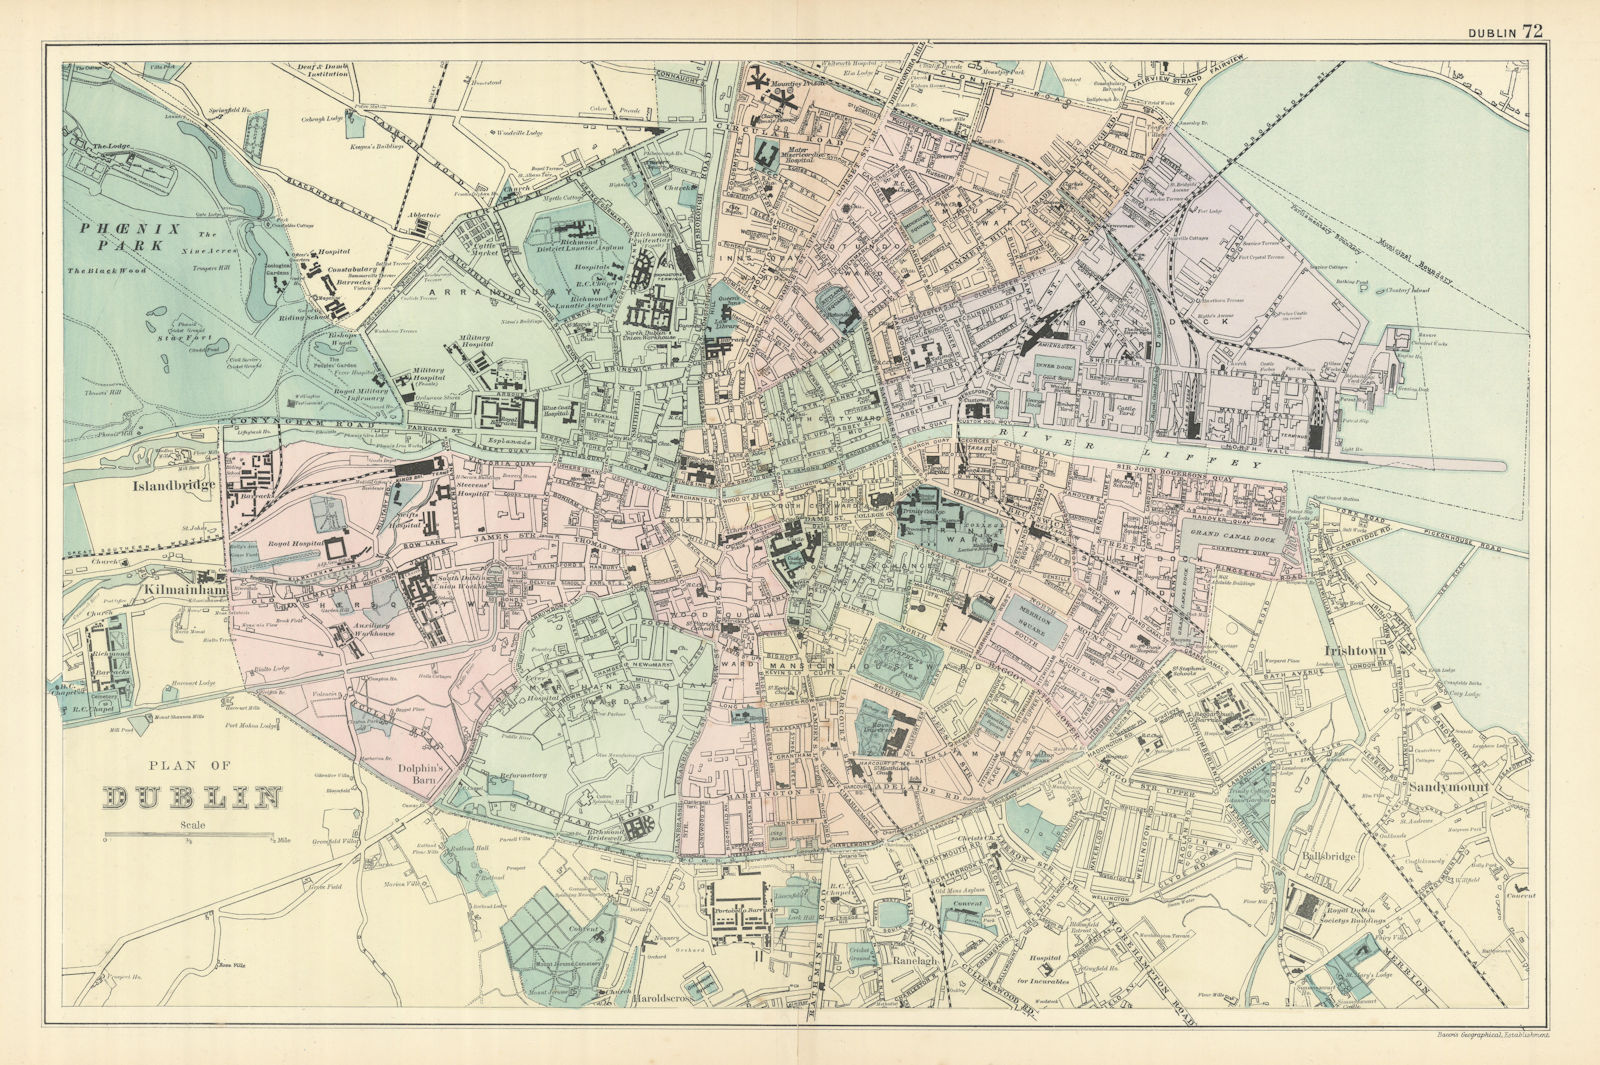 Associate Product DUBLIN antique town city plan by GW BACON Ireland 1898 old map chart